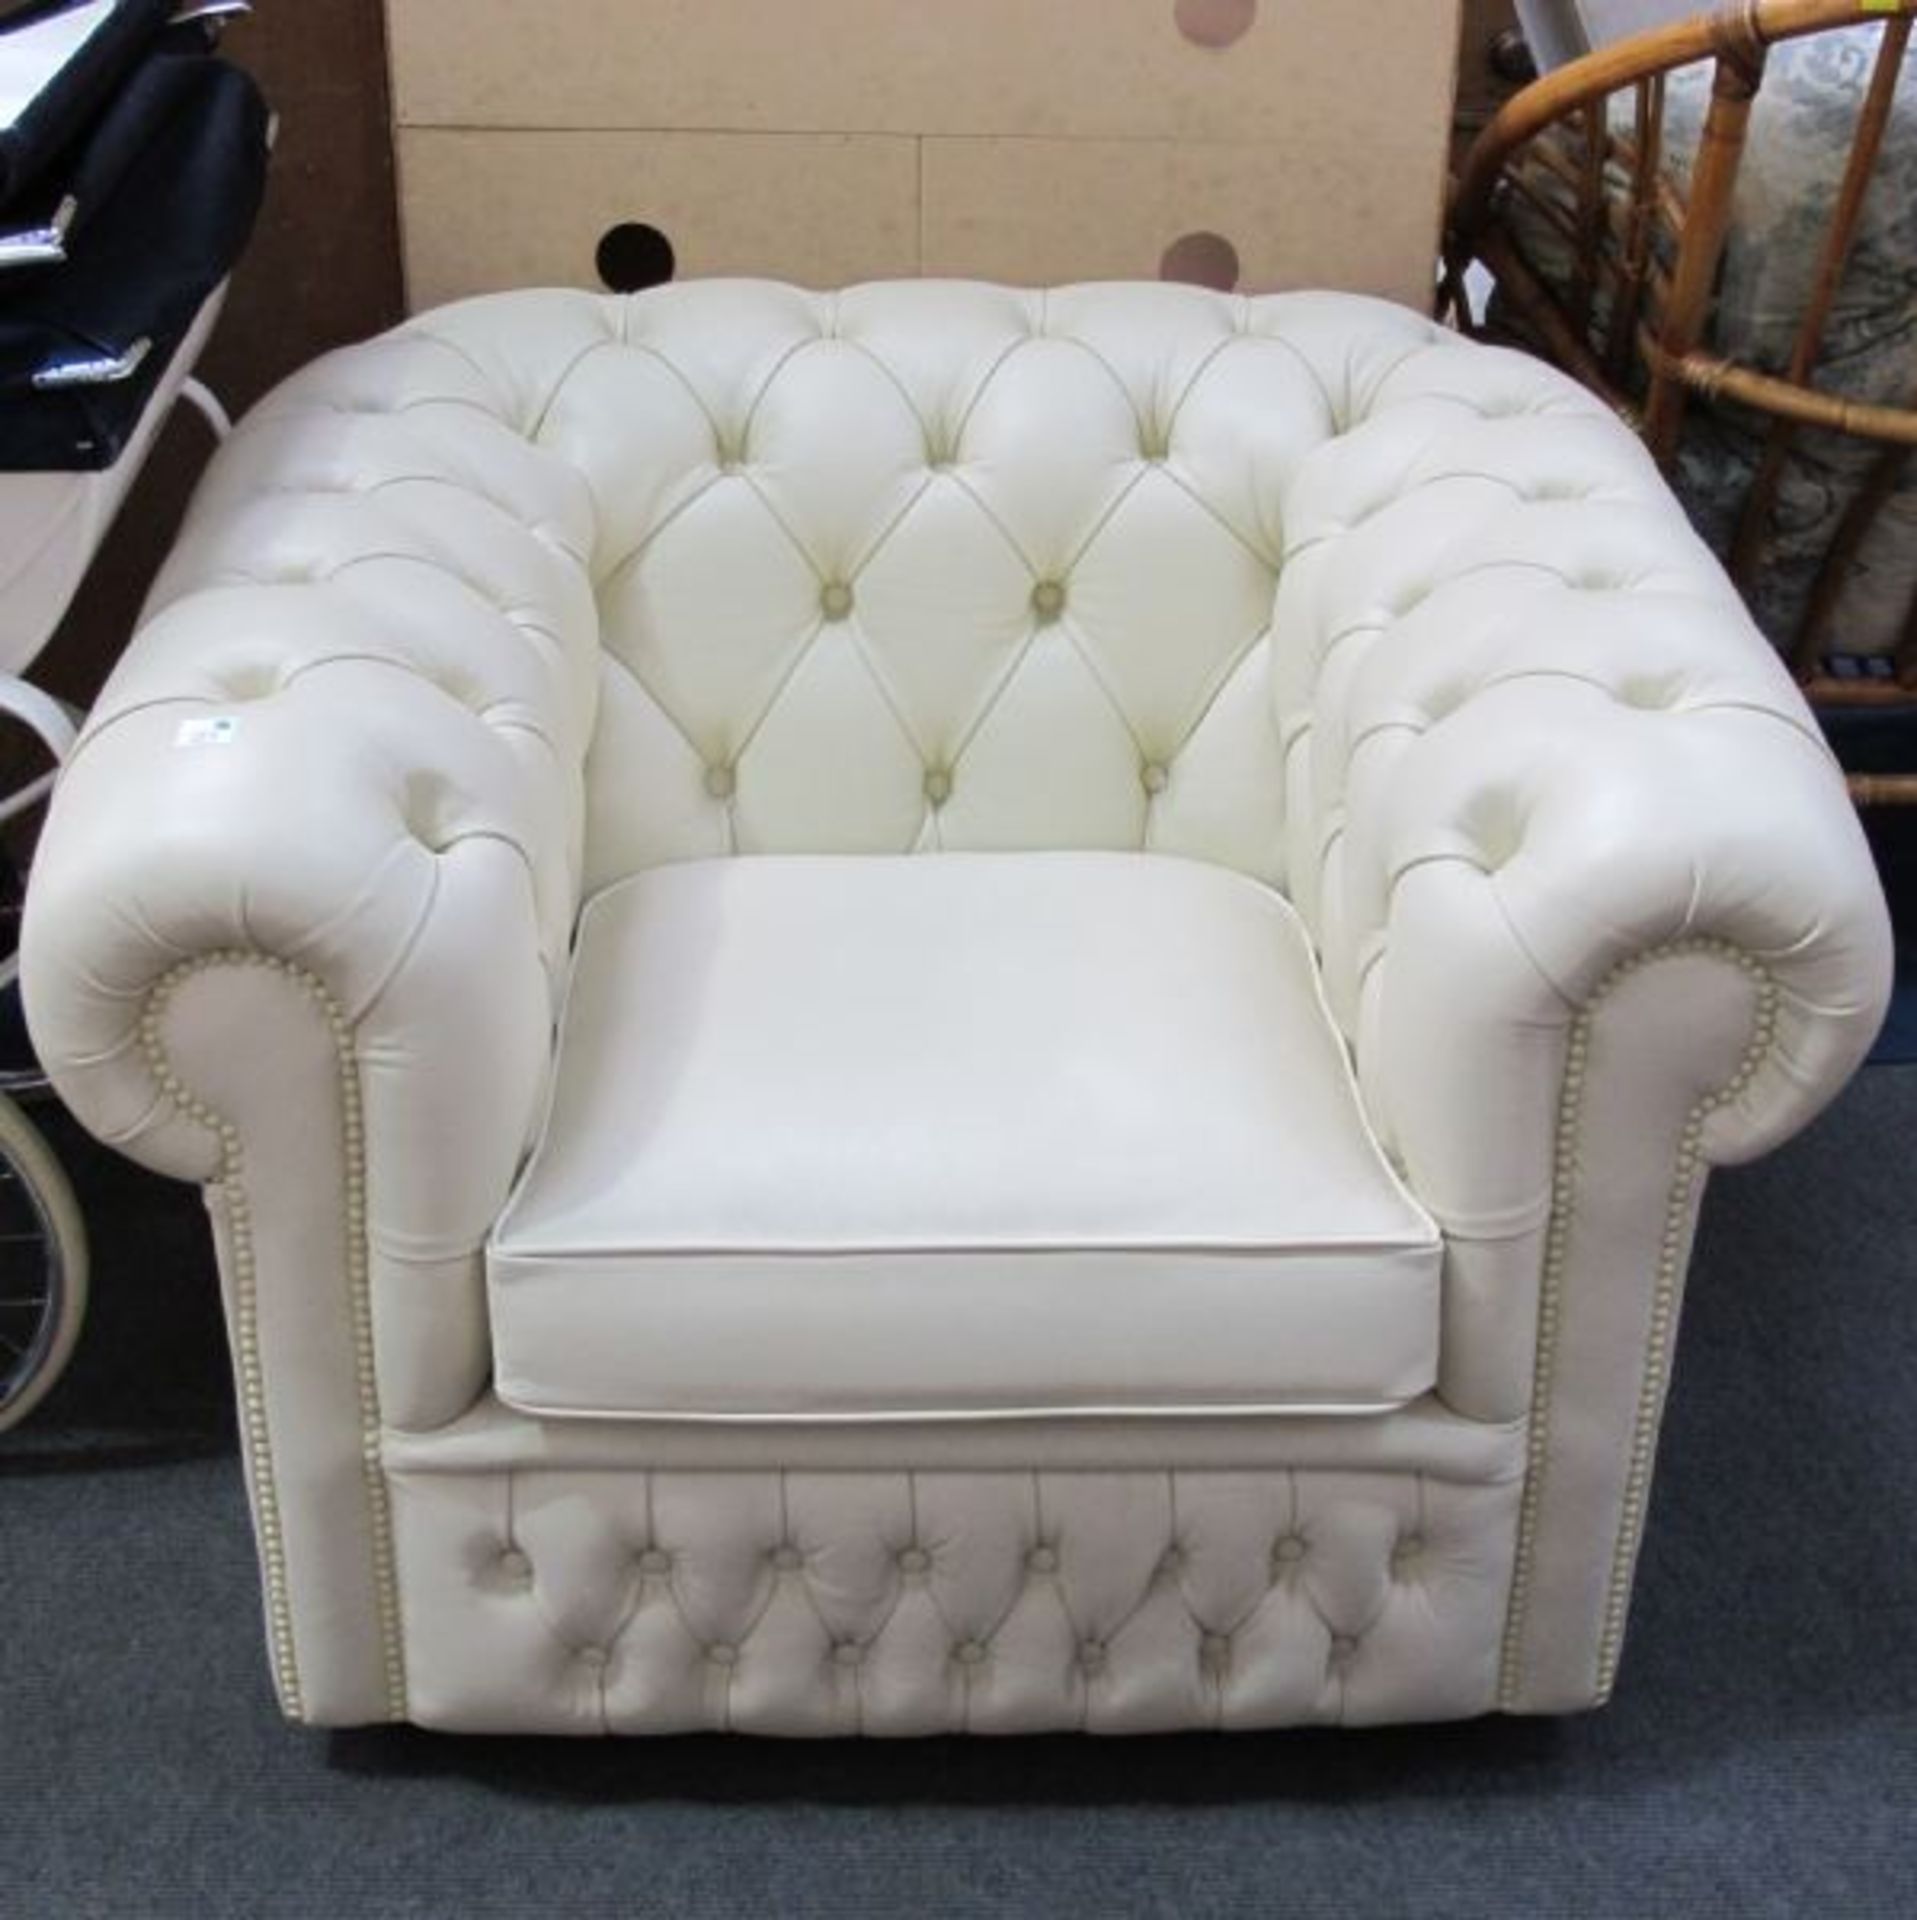 A Cream Leather Chesterfield Type Armchair. (est. £50-£80)